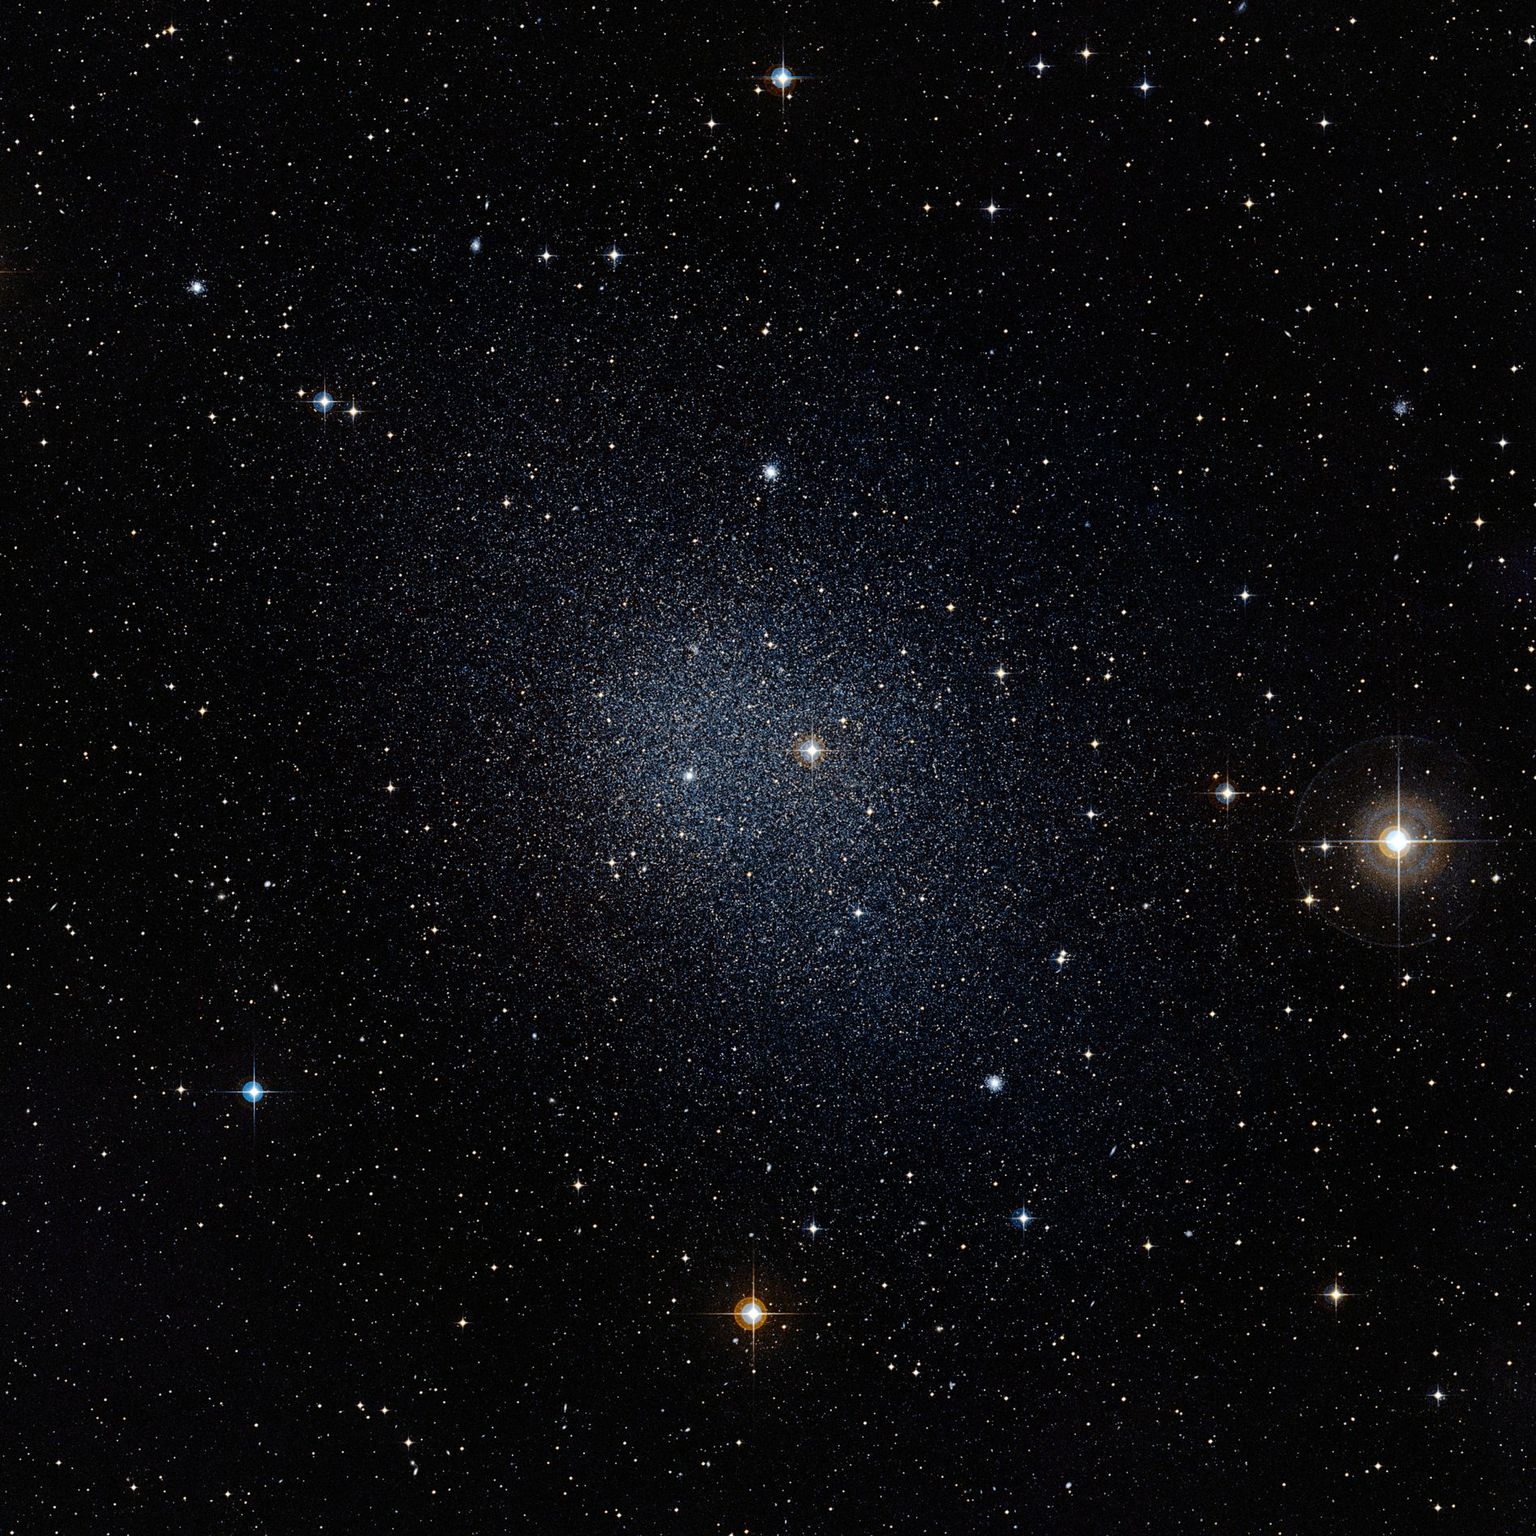 One of the dwarf galaxies which is orbiting around our Milky Way galaxy as part of a planar structure.